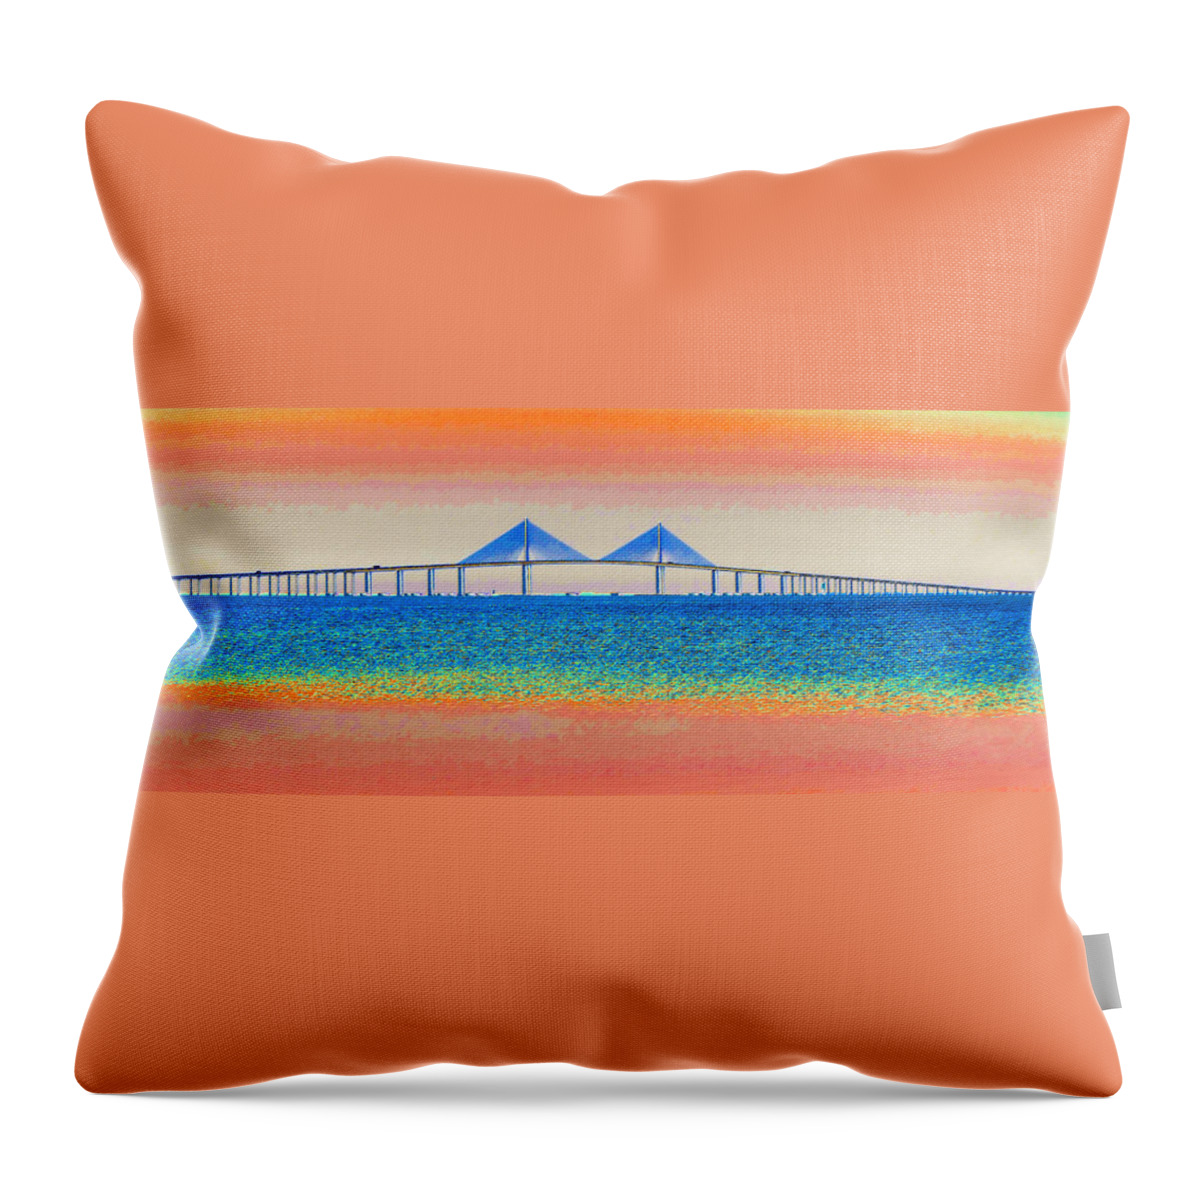 Art Throw Pillow featuring the painting Skyway Morning by David Lee Thompson